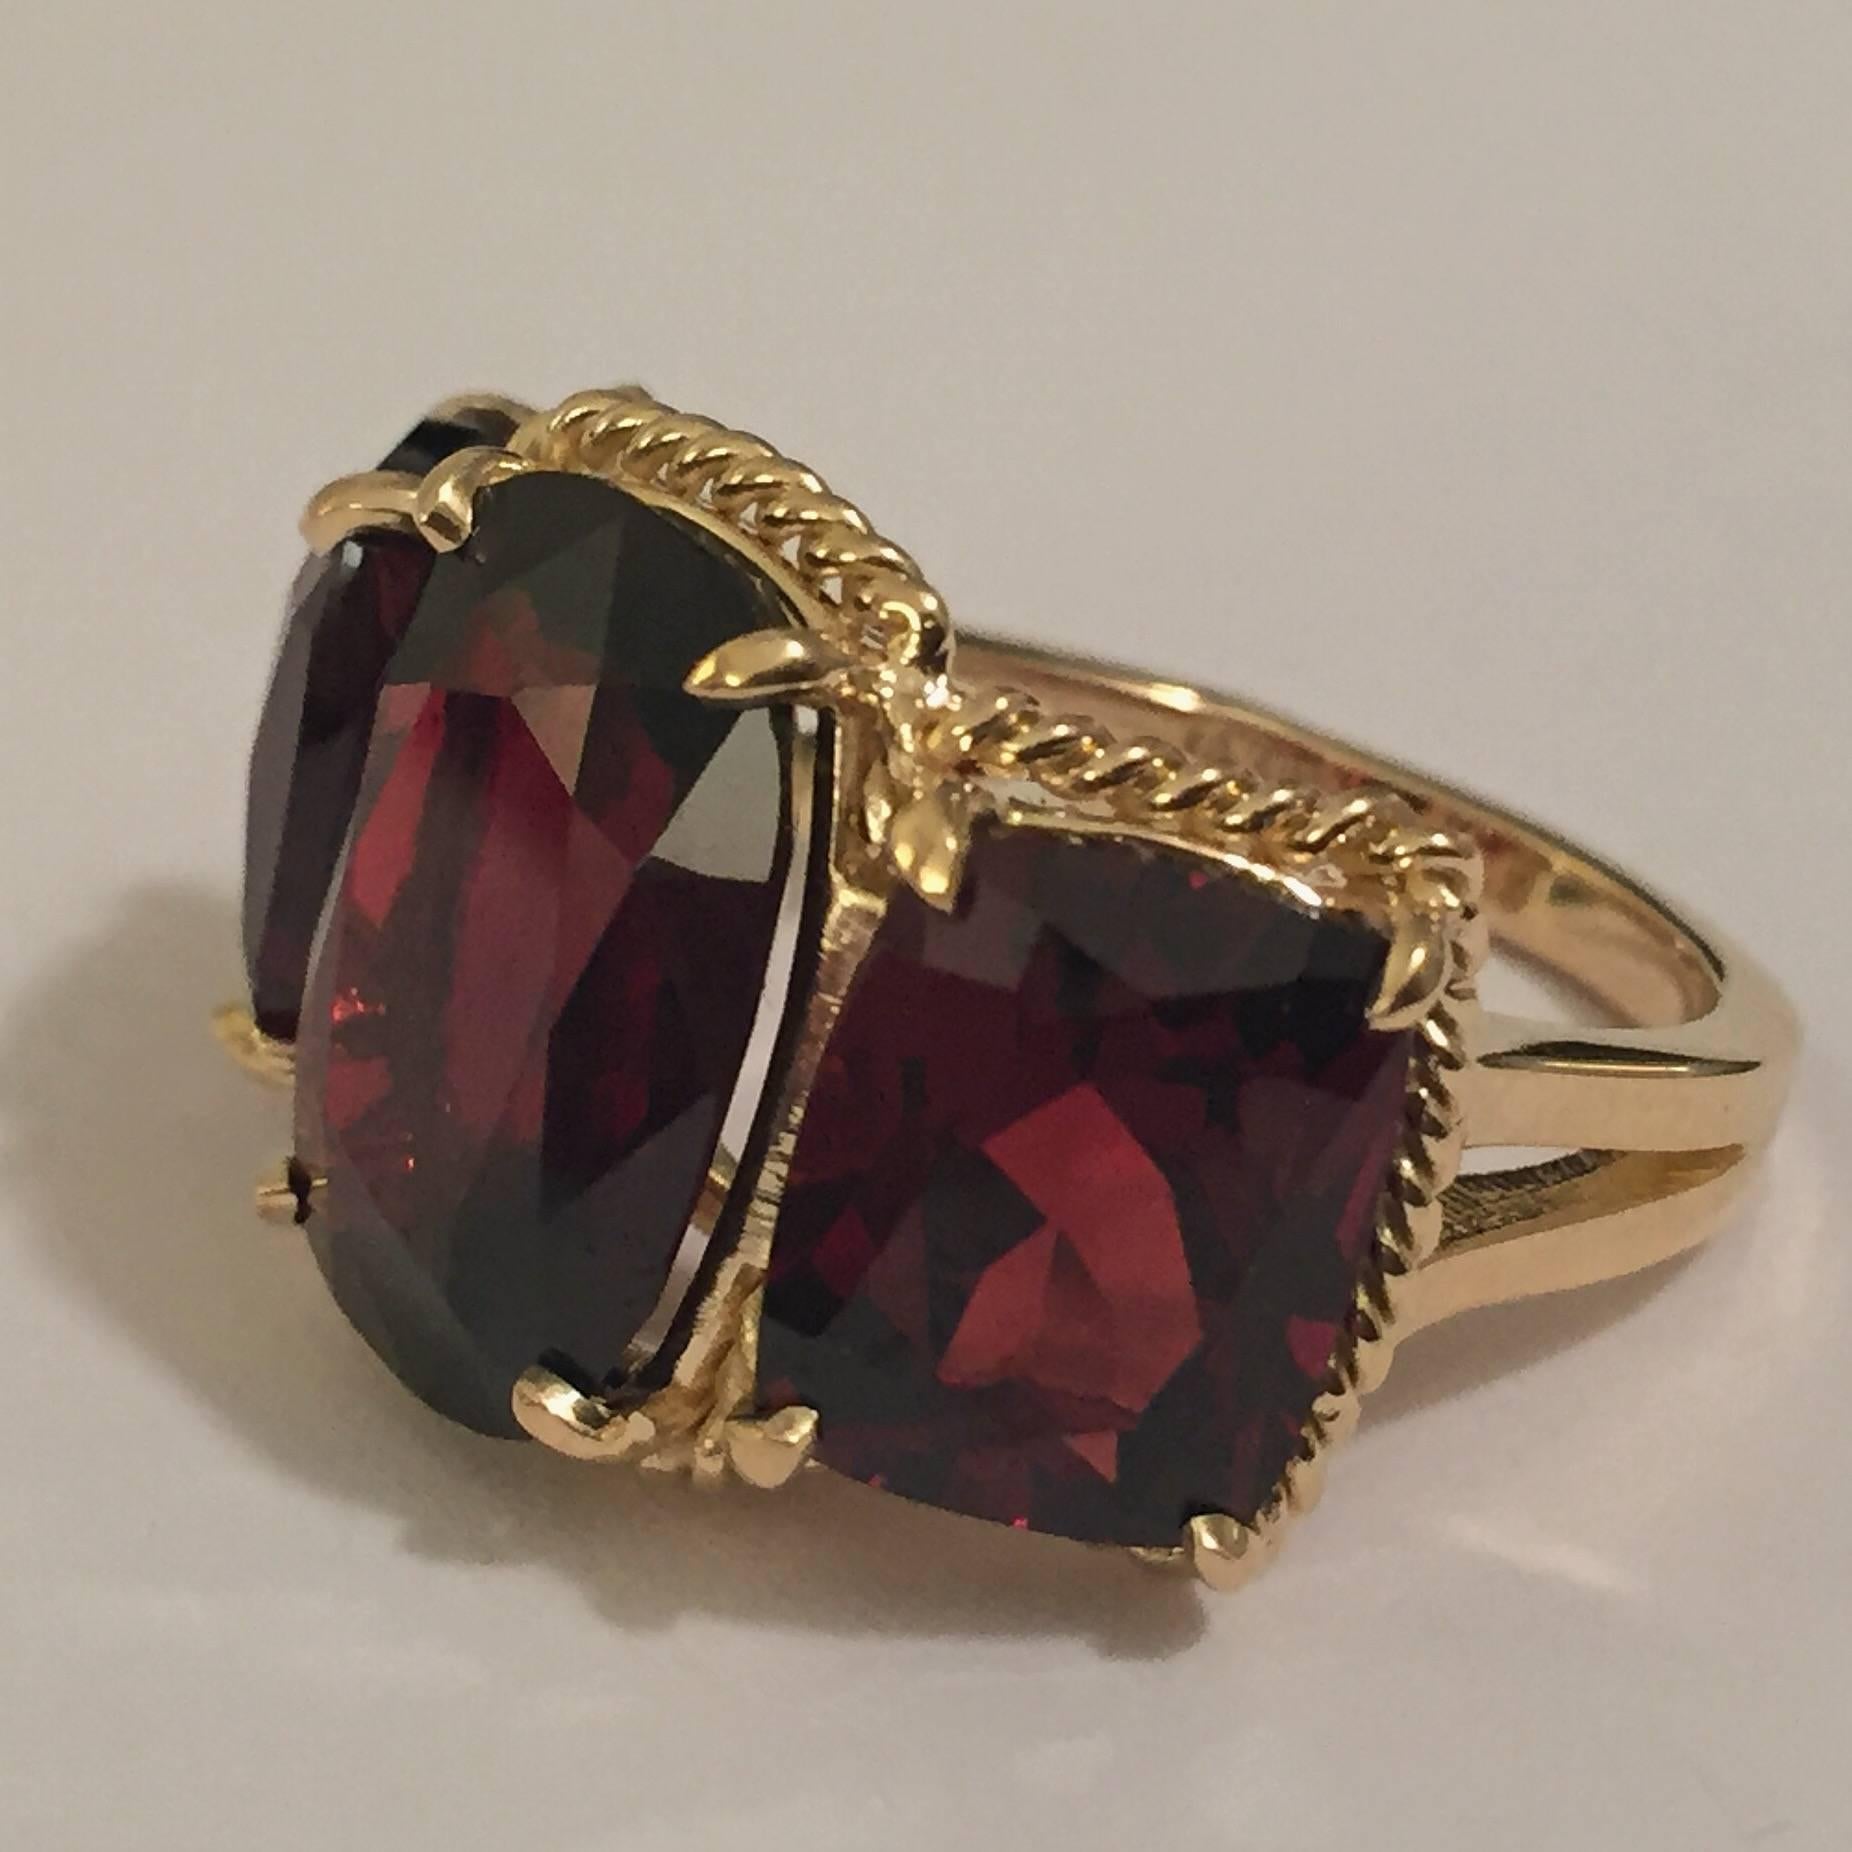 Elegant 18kt Yellow Three Stone Ring with Rope Twist Border with split shank detail. The ring features three faceted cushion cut Garnet stones surrounded by twisted gold rope. The center Garnet stone measures 5/8